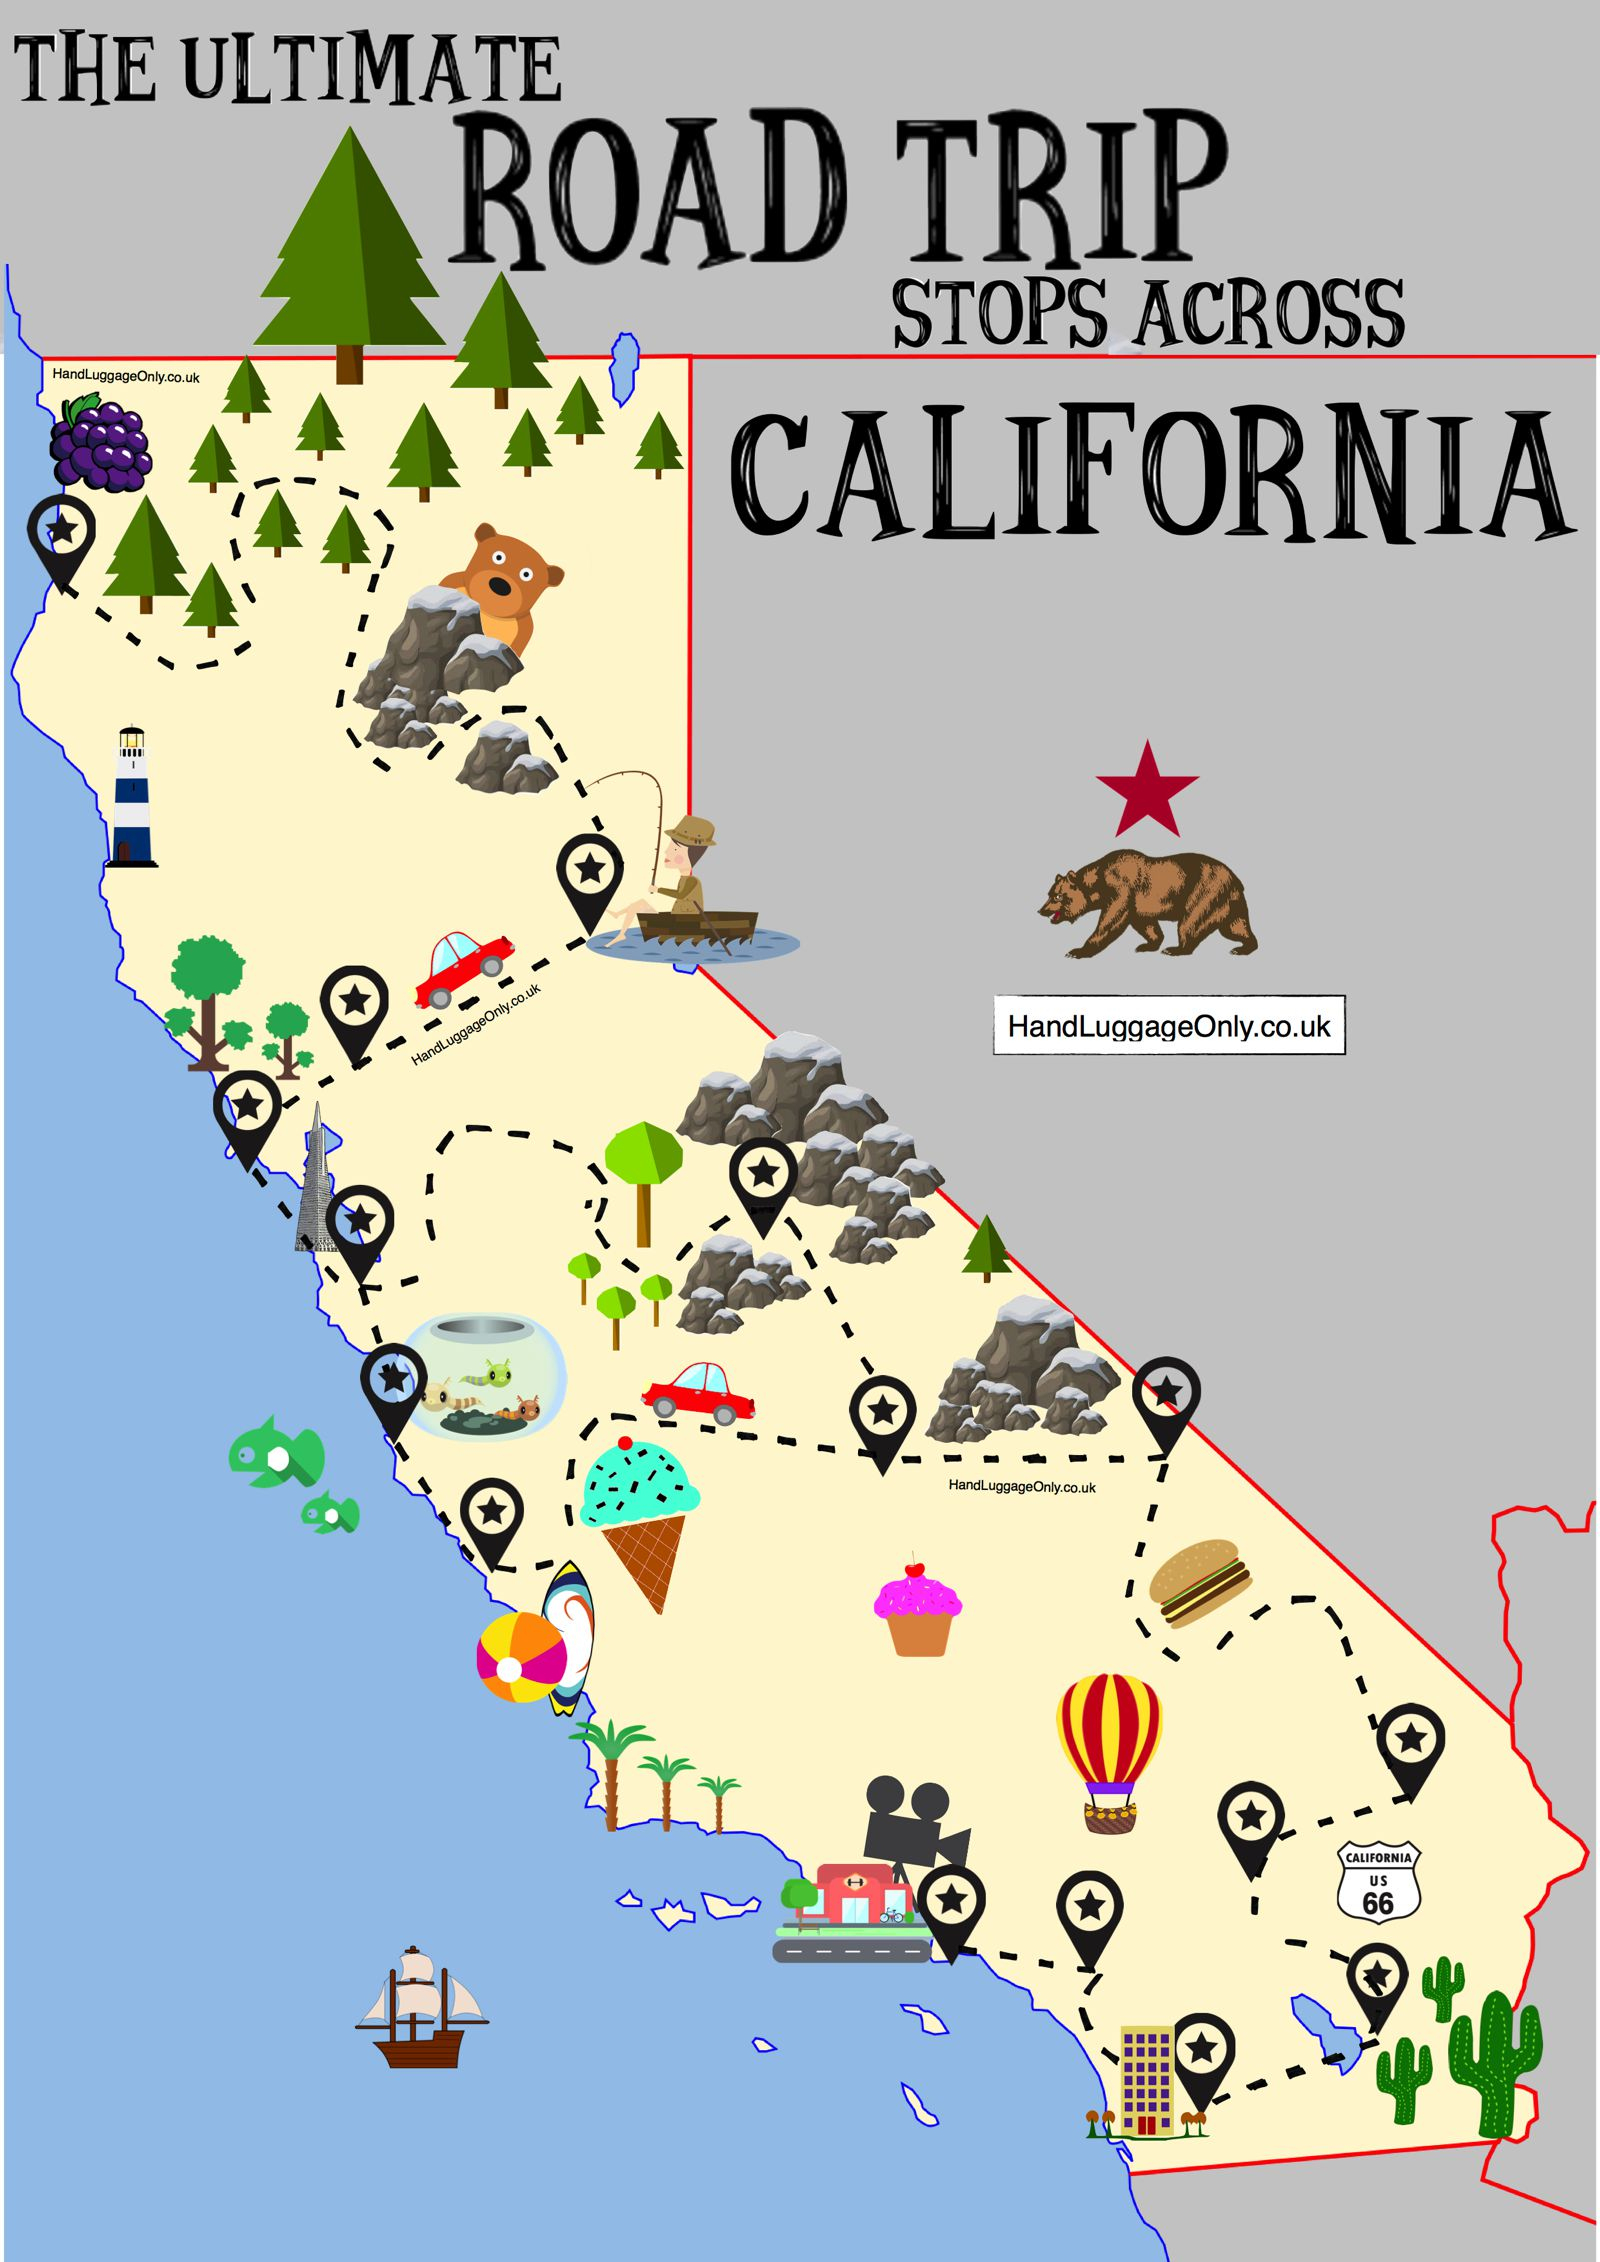 The Ultimate Road Trip Map Of Places To Visit In California - Hand - California Travel Map